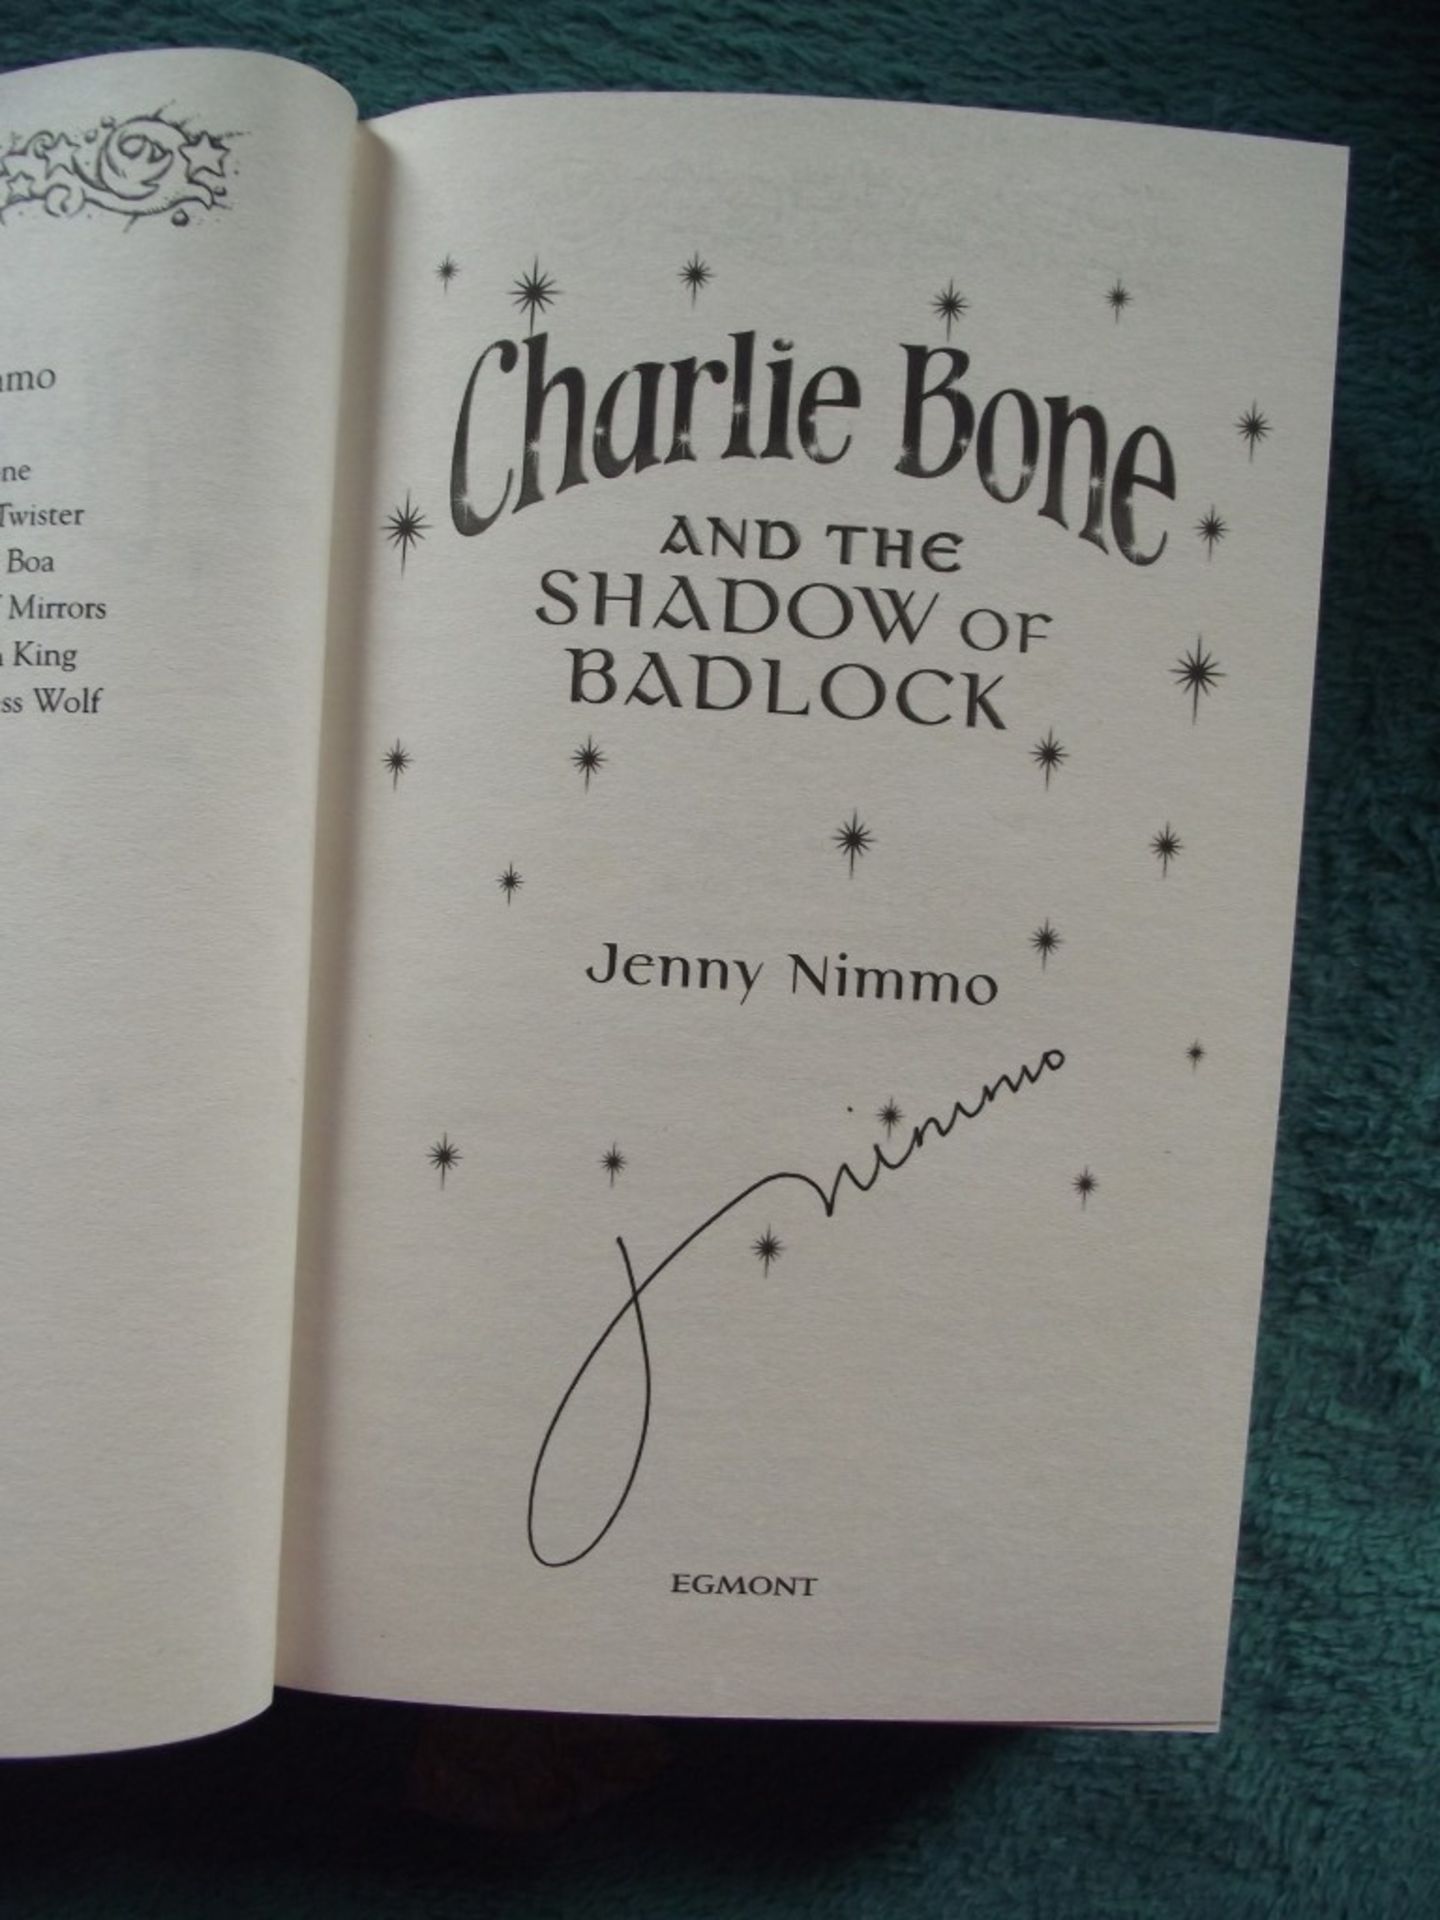 Jenny Nimmo - Children of The Red King (Charlie Bone) - 13 Books - All 1st/1st & Signed - Unrea... - Image 26 of 63